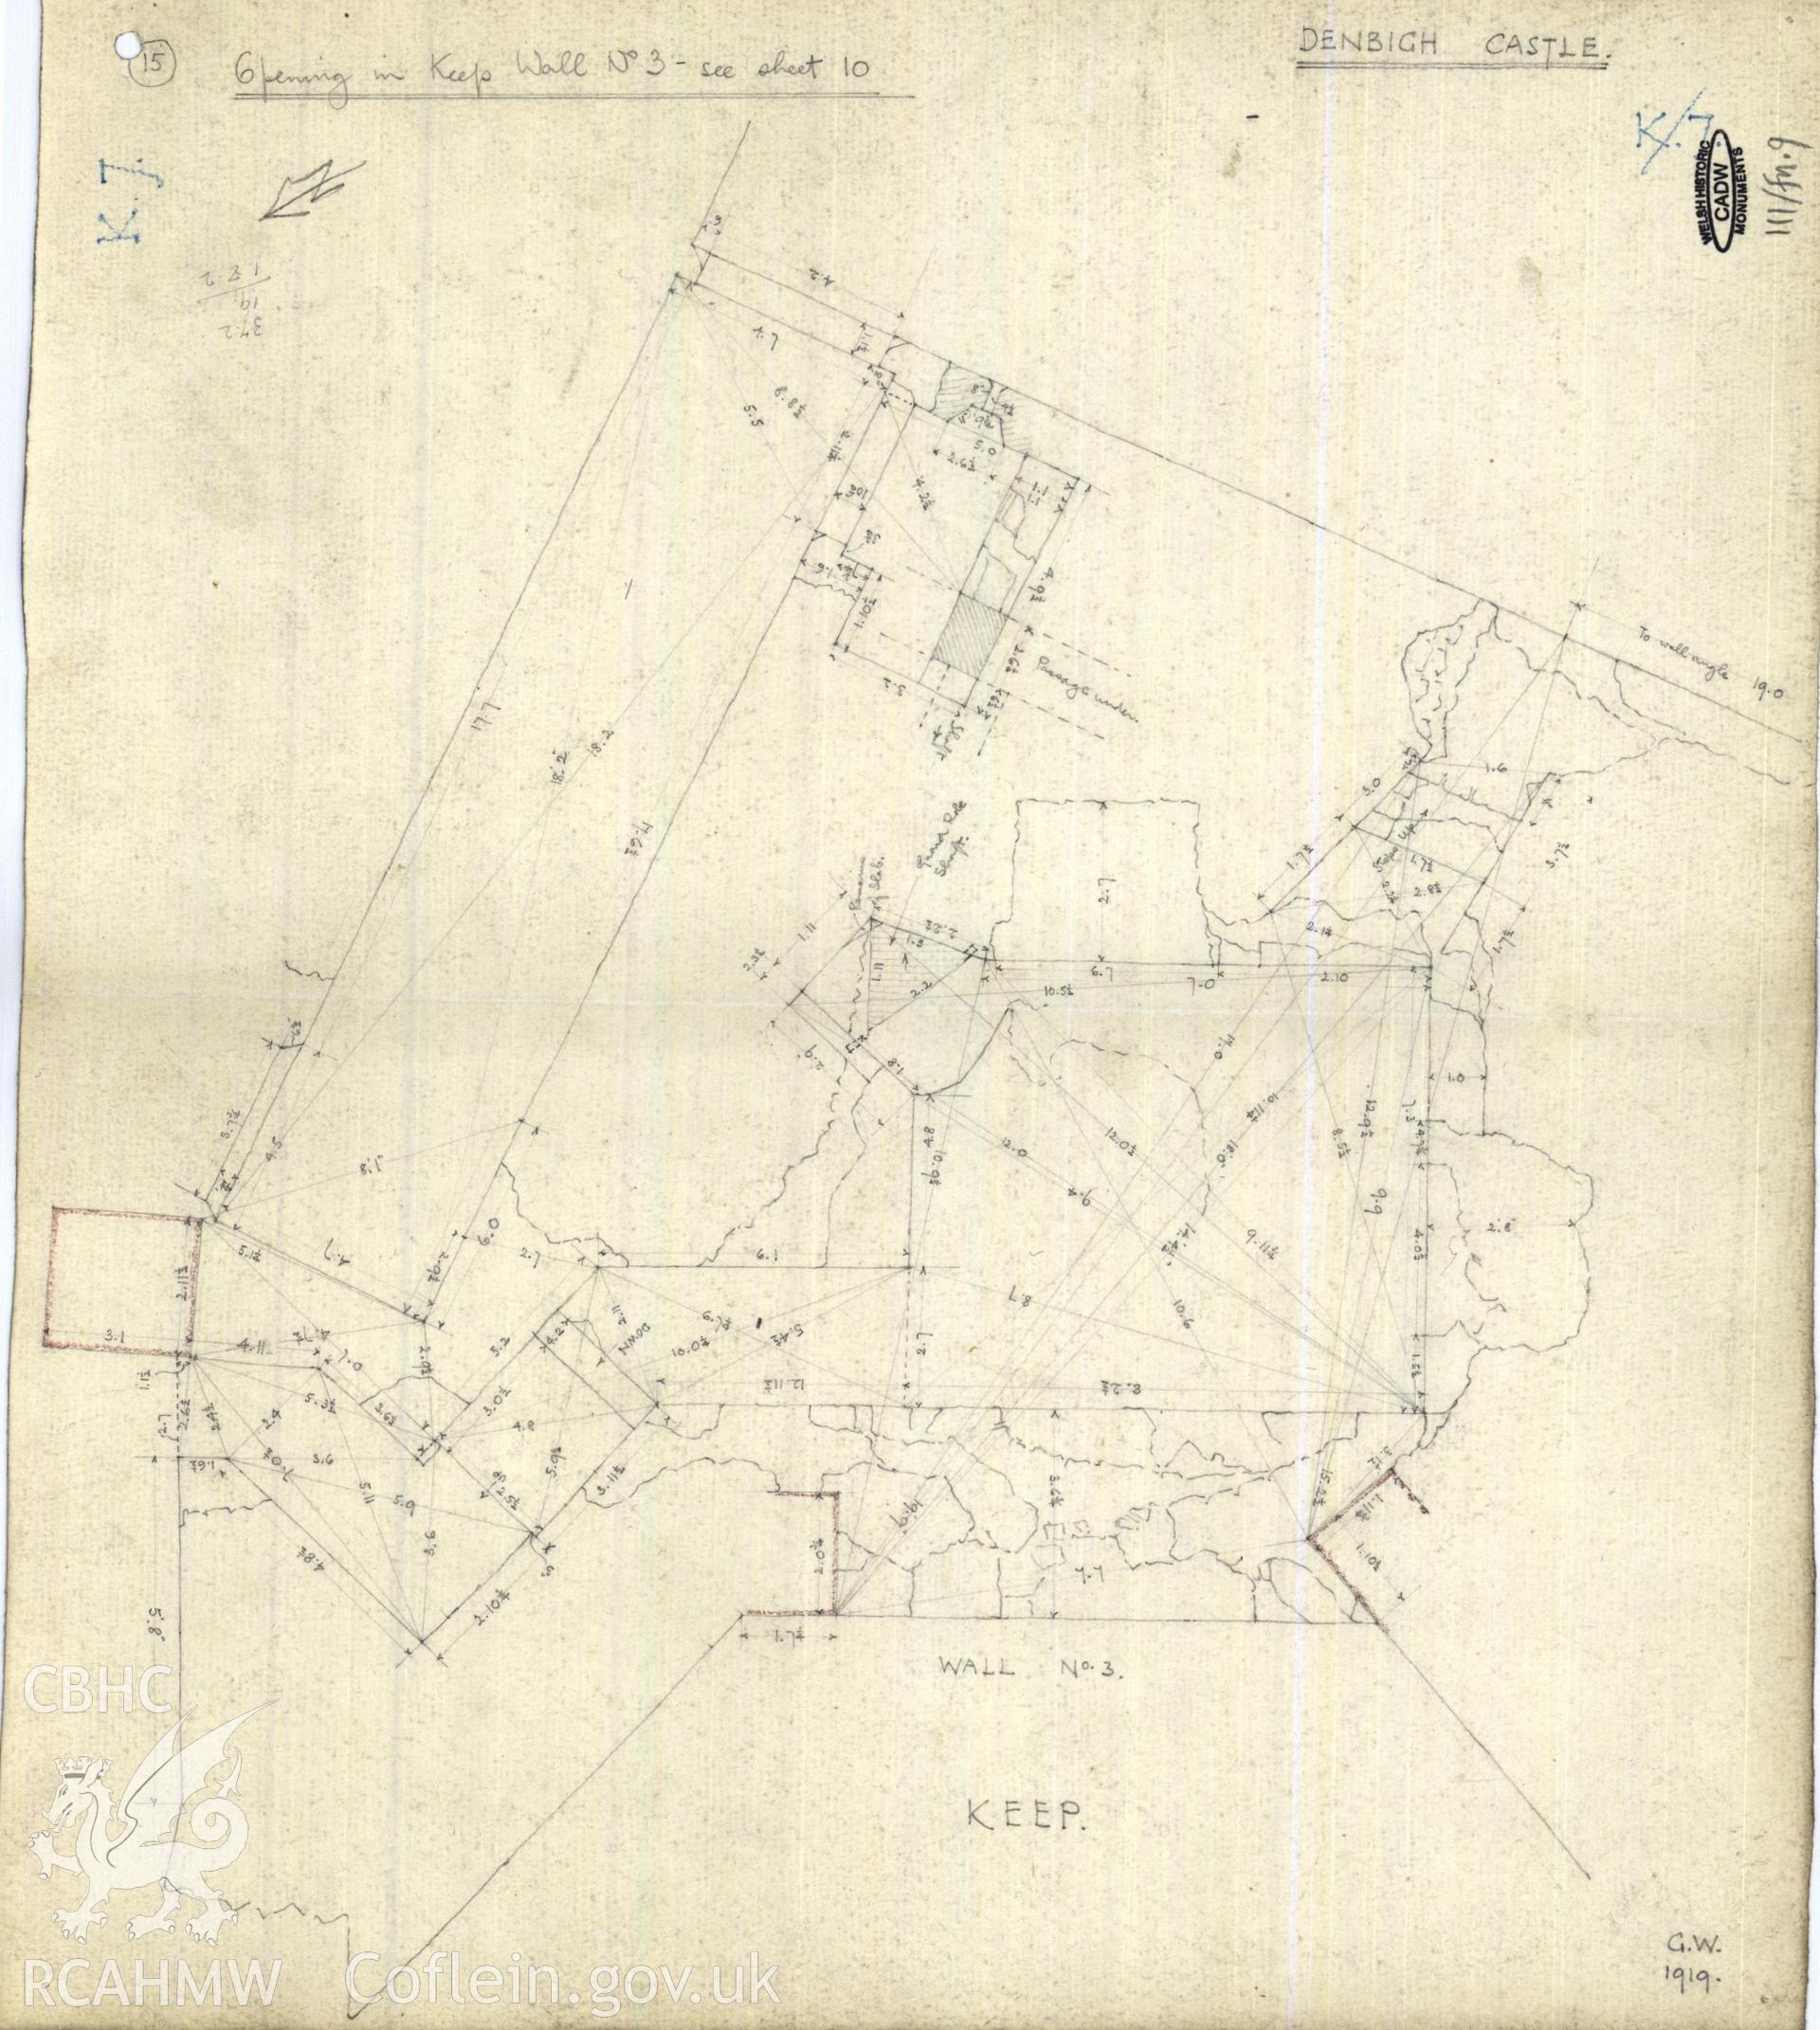 Cadw guardianship monument drawing of Denbigh Castle. T1, m, chamber etc to E (15) K7. Cadw Ref. No:111/fn.9. No scale.